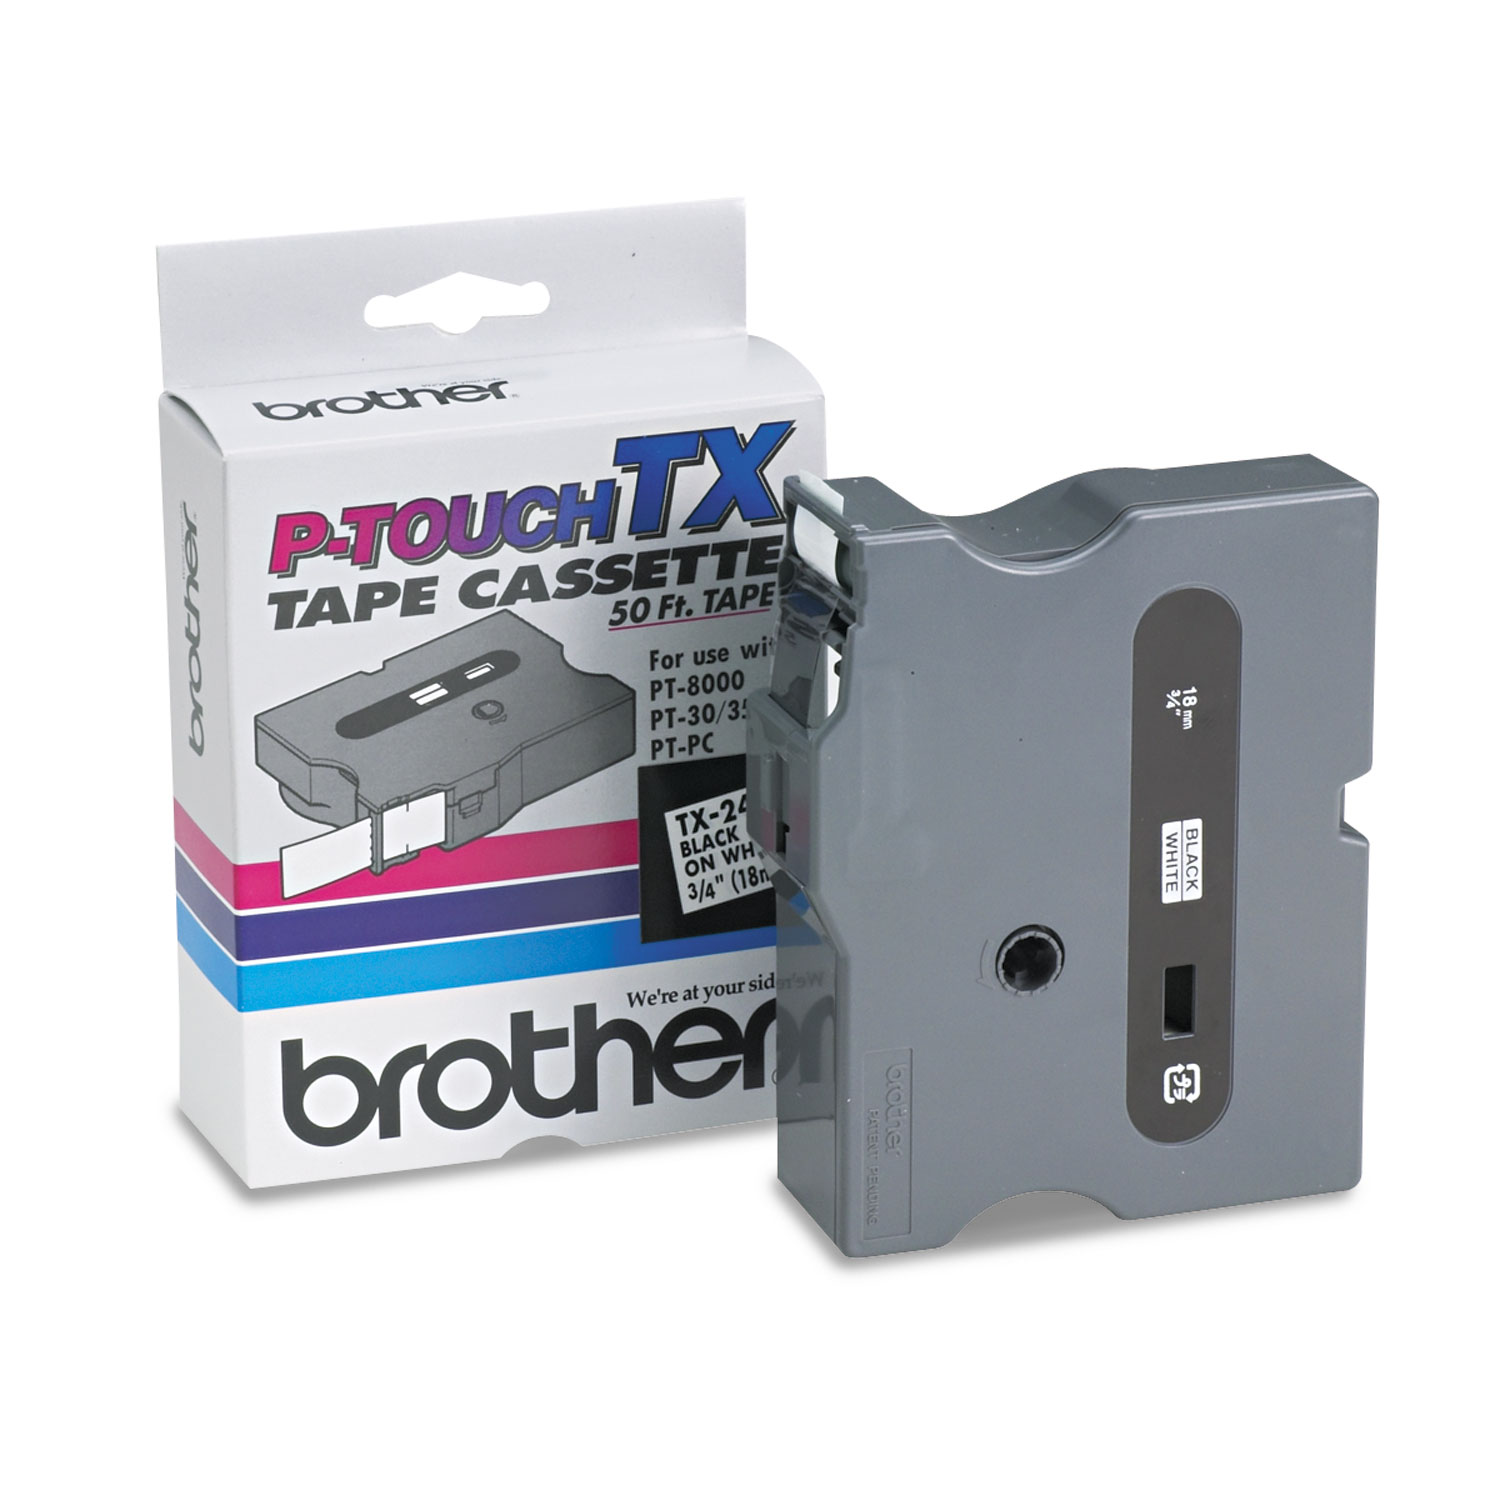  Brother P-Touch TX2411 TX Tape Cartridge for PT-8000, PT-PC, PT-30/35, 0.7 x 50 ft, Black on White (BRTTX2411) 